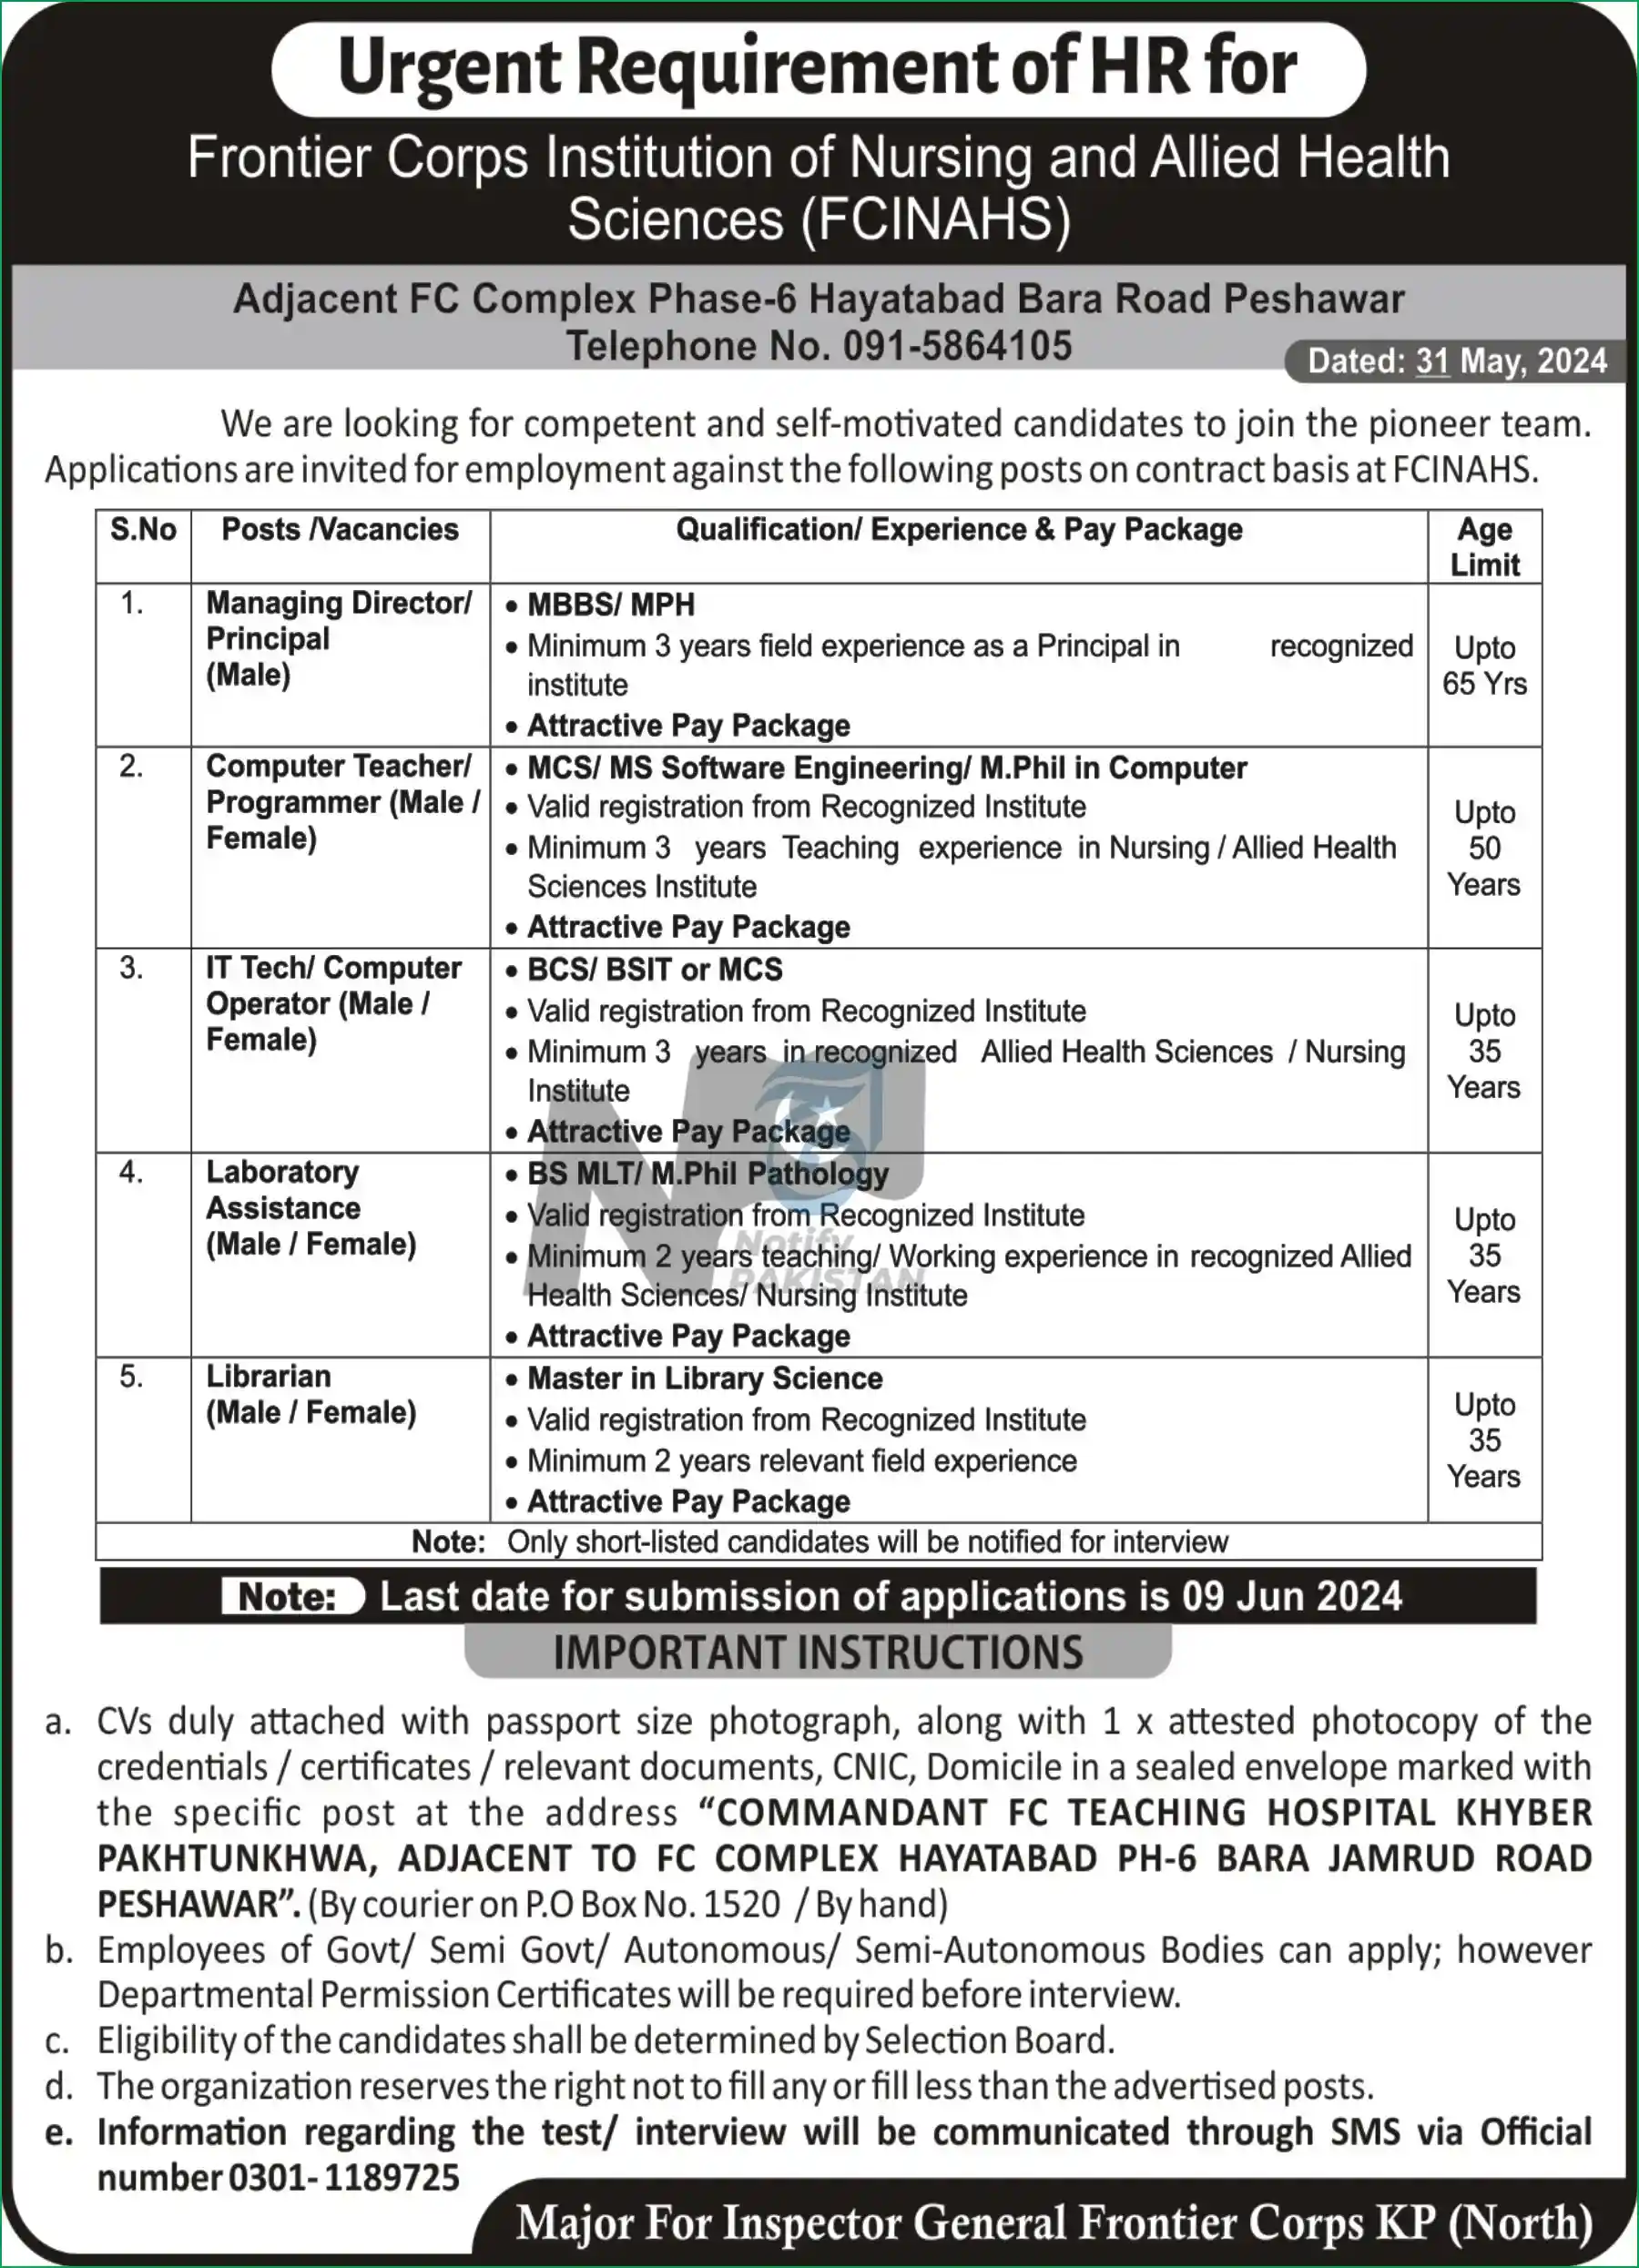 Frontier Corps Institution of Nursing and Allied Health Sciences FCINAHS Peshawar Jobs 2024 Advertisement